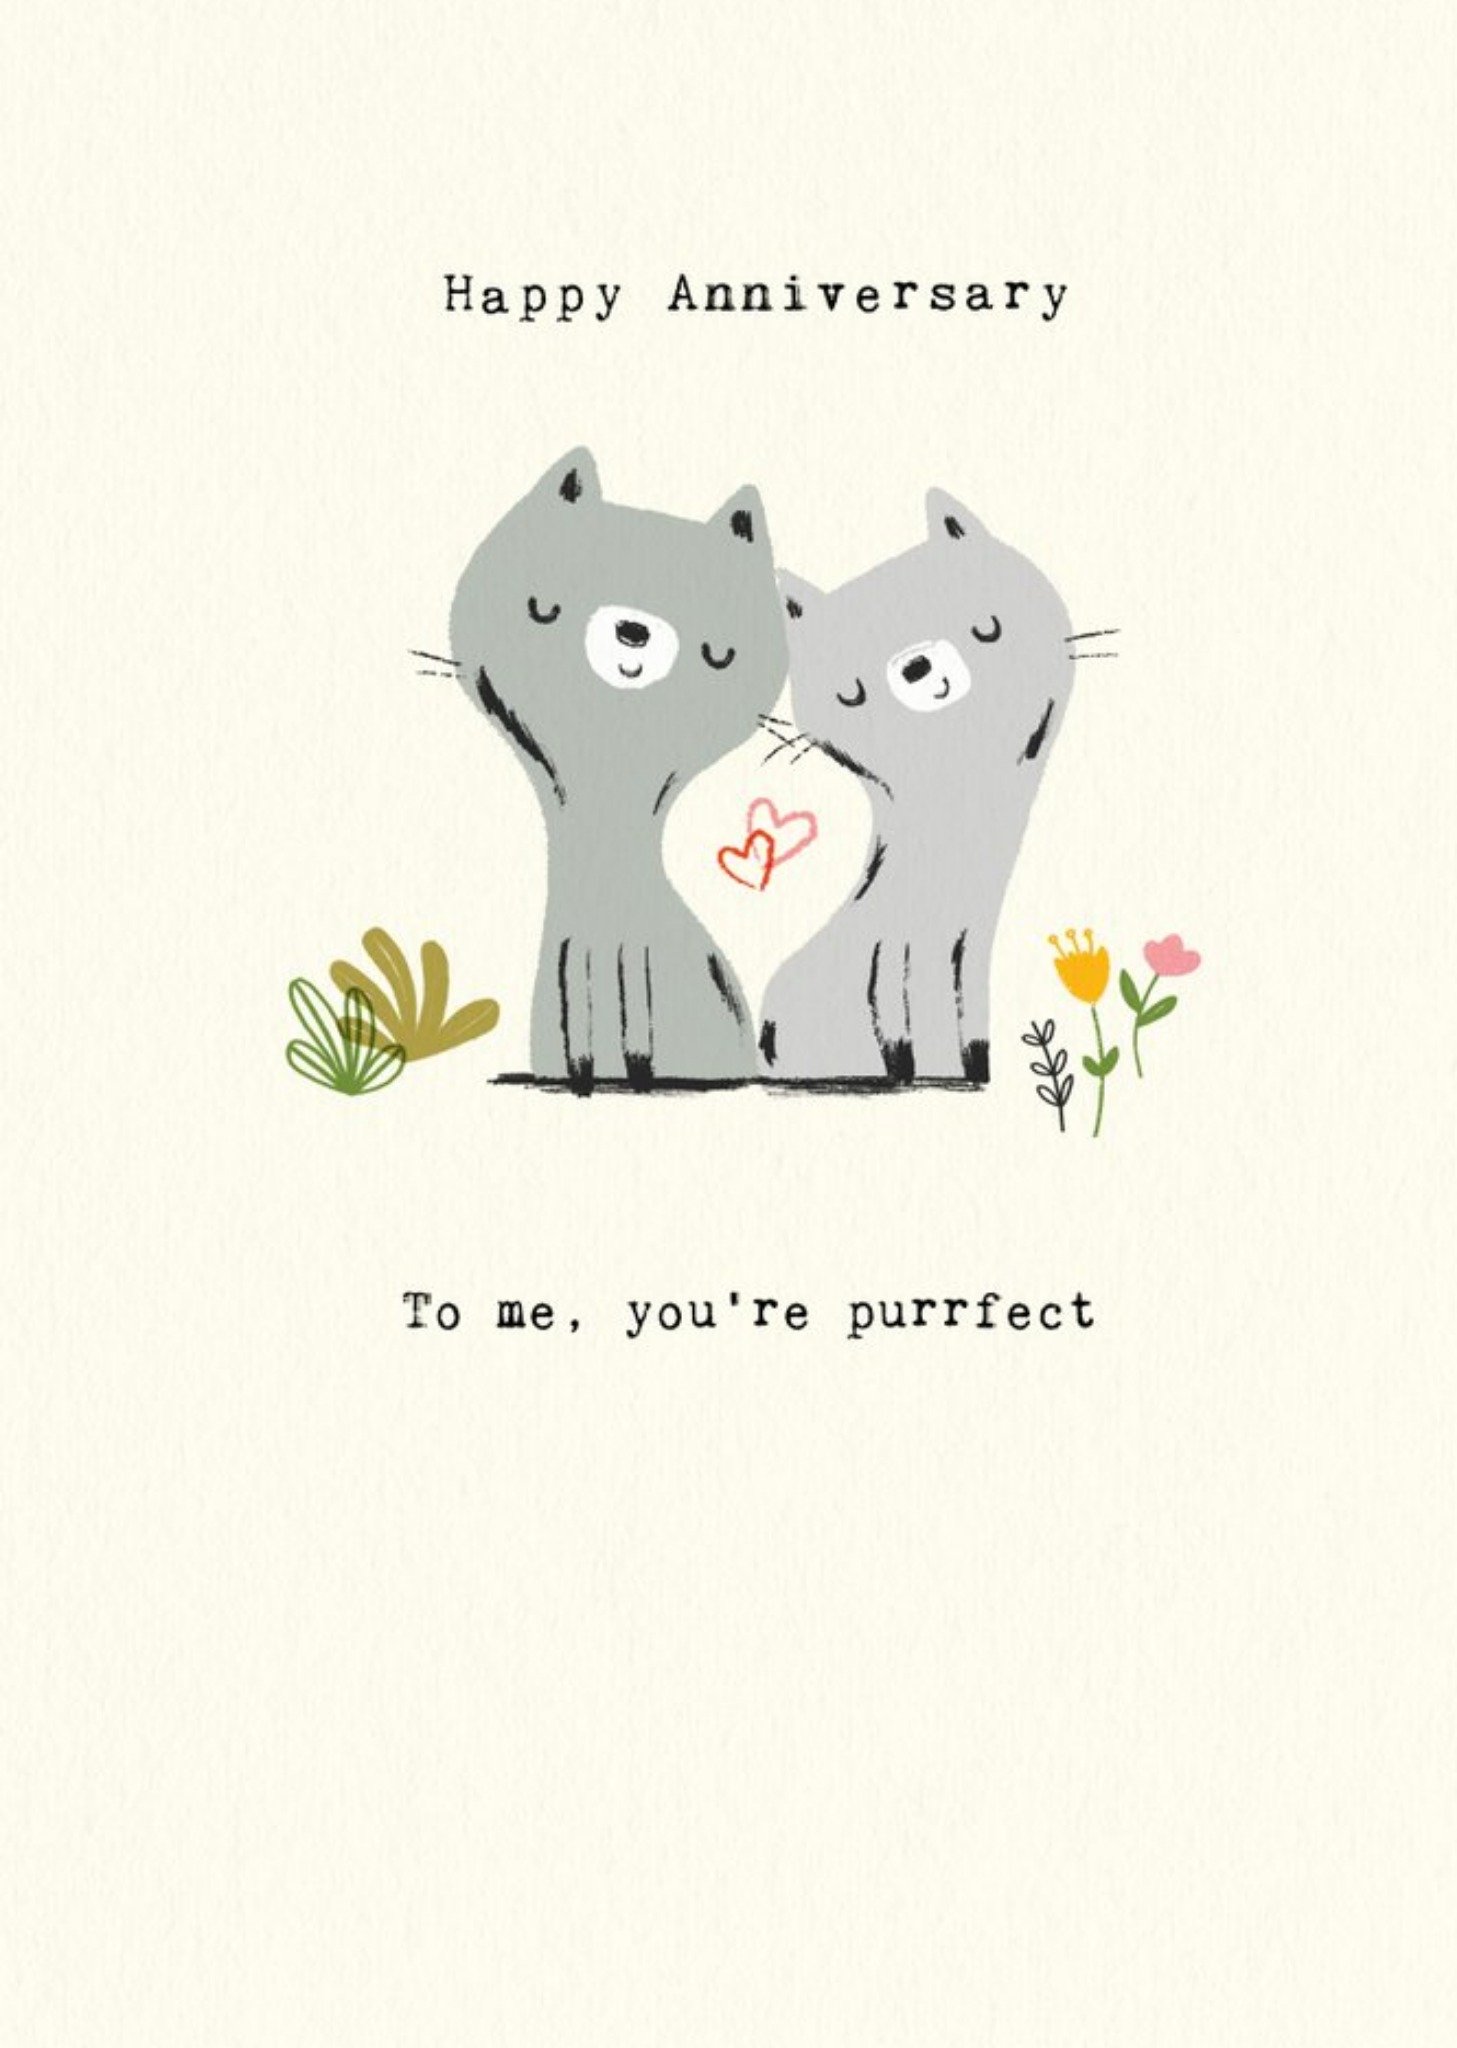 Moonpig Two Cats To Me You Are Purrfect Happy Anniversary Card Ecard